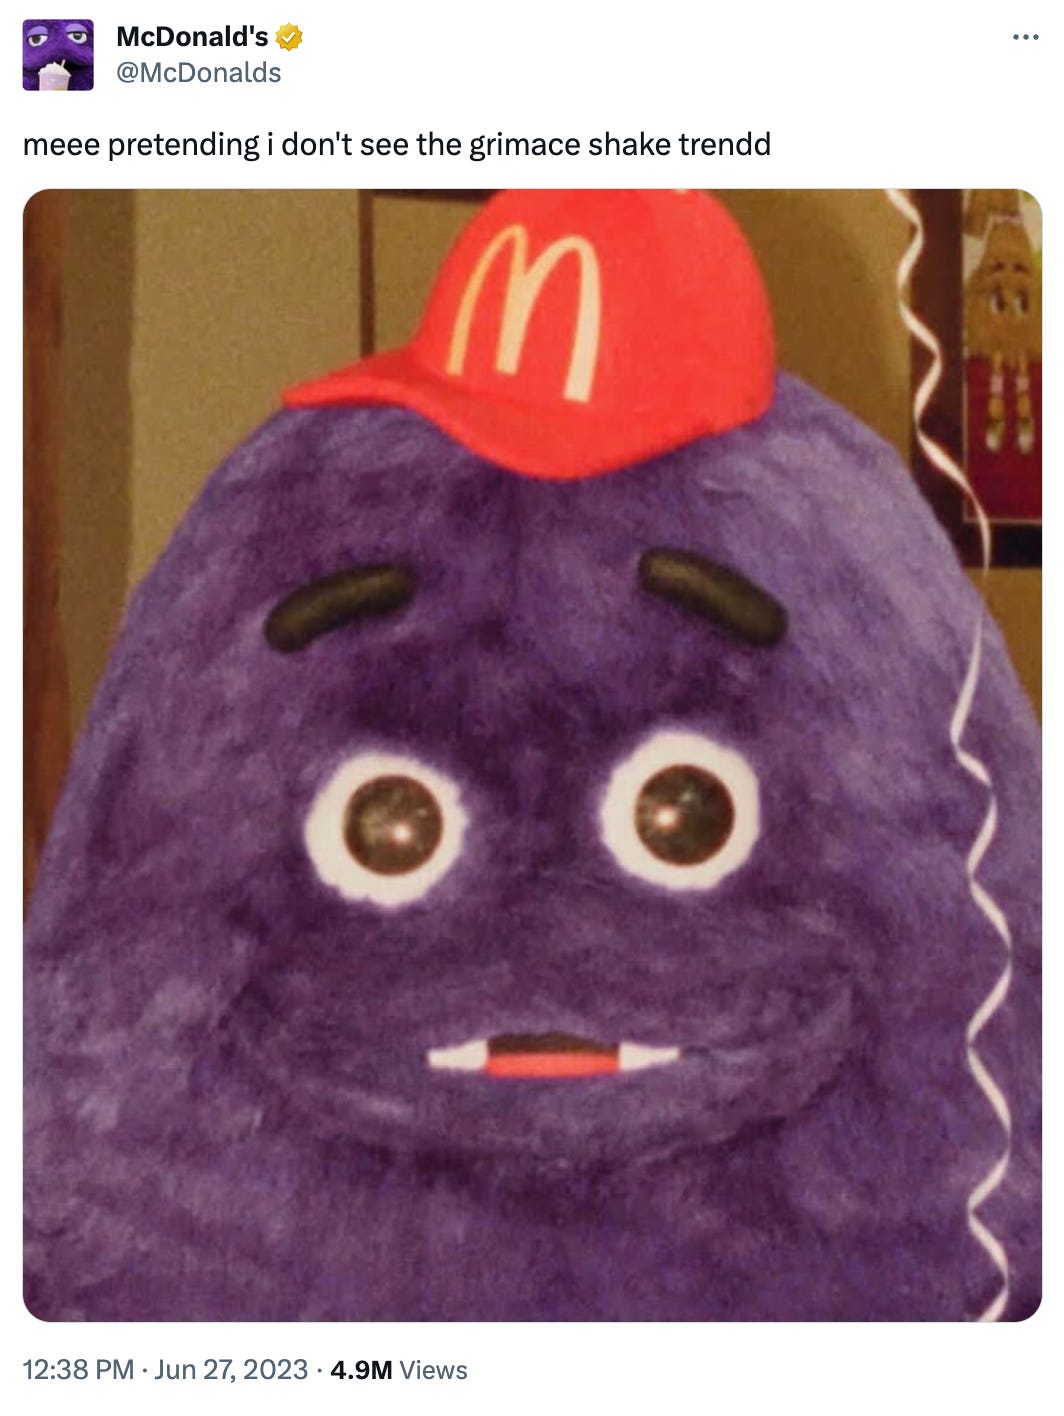 McDonald's tweet featuring Grimace with a red McDonalds hat. The Tweet says "me pretending i dont see the grimace shake trend